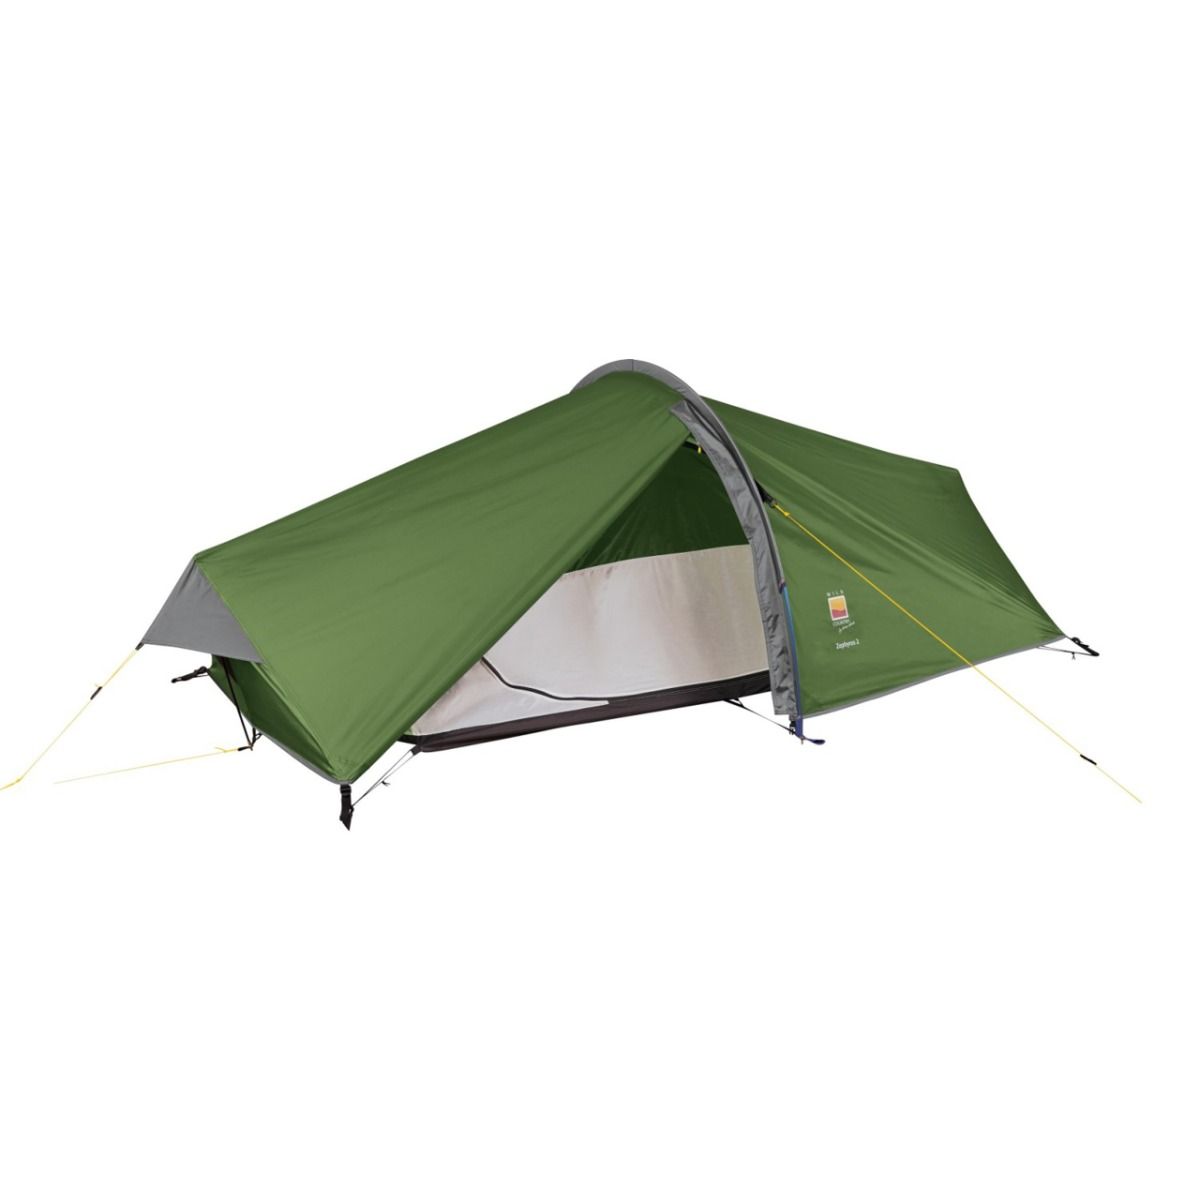 Wild Country Tents Zephyros Compact 2 Man Tent